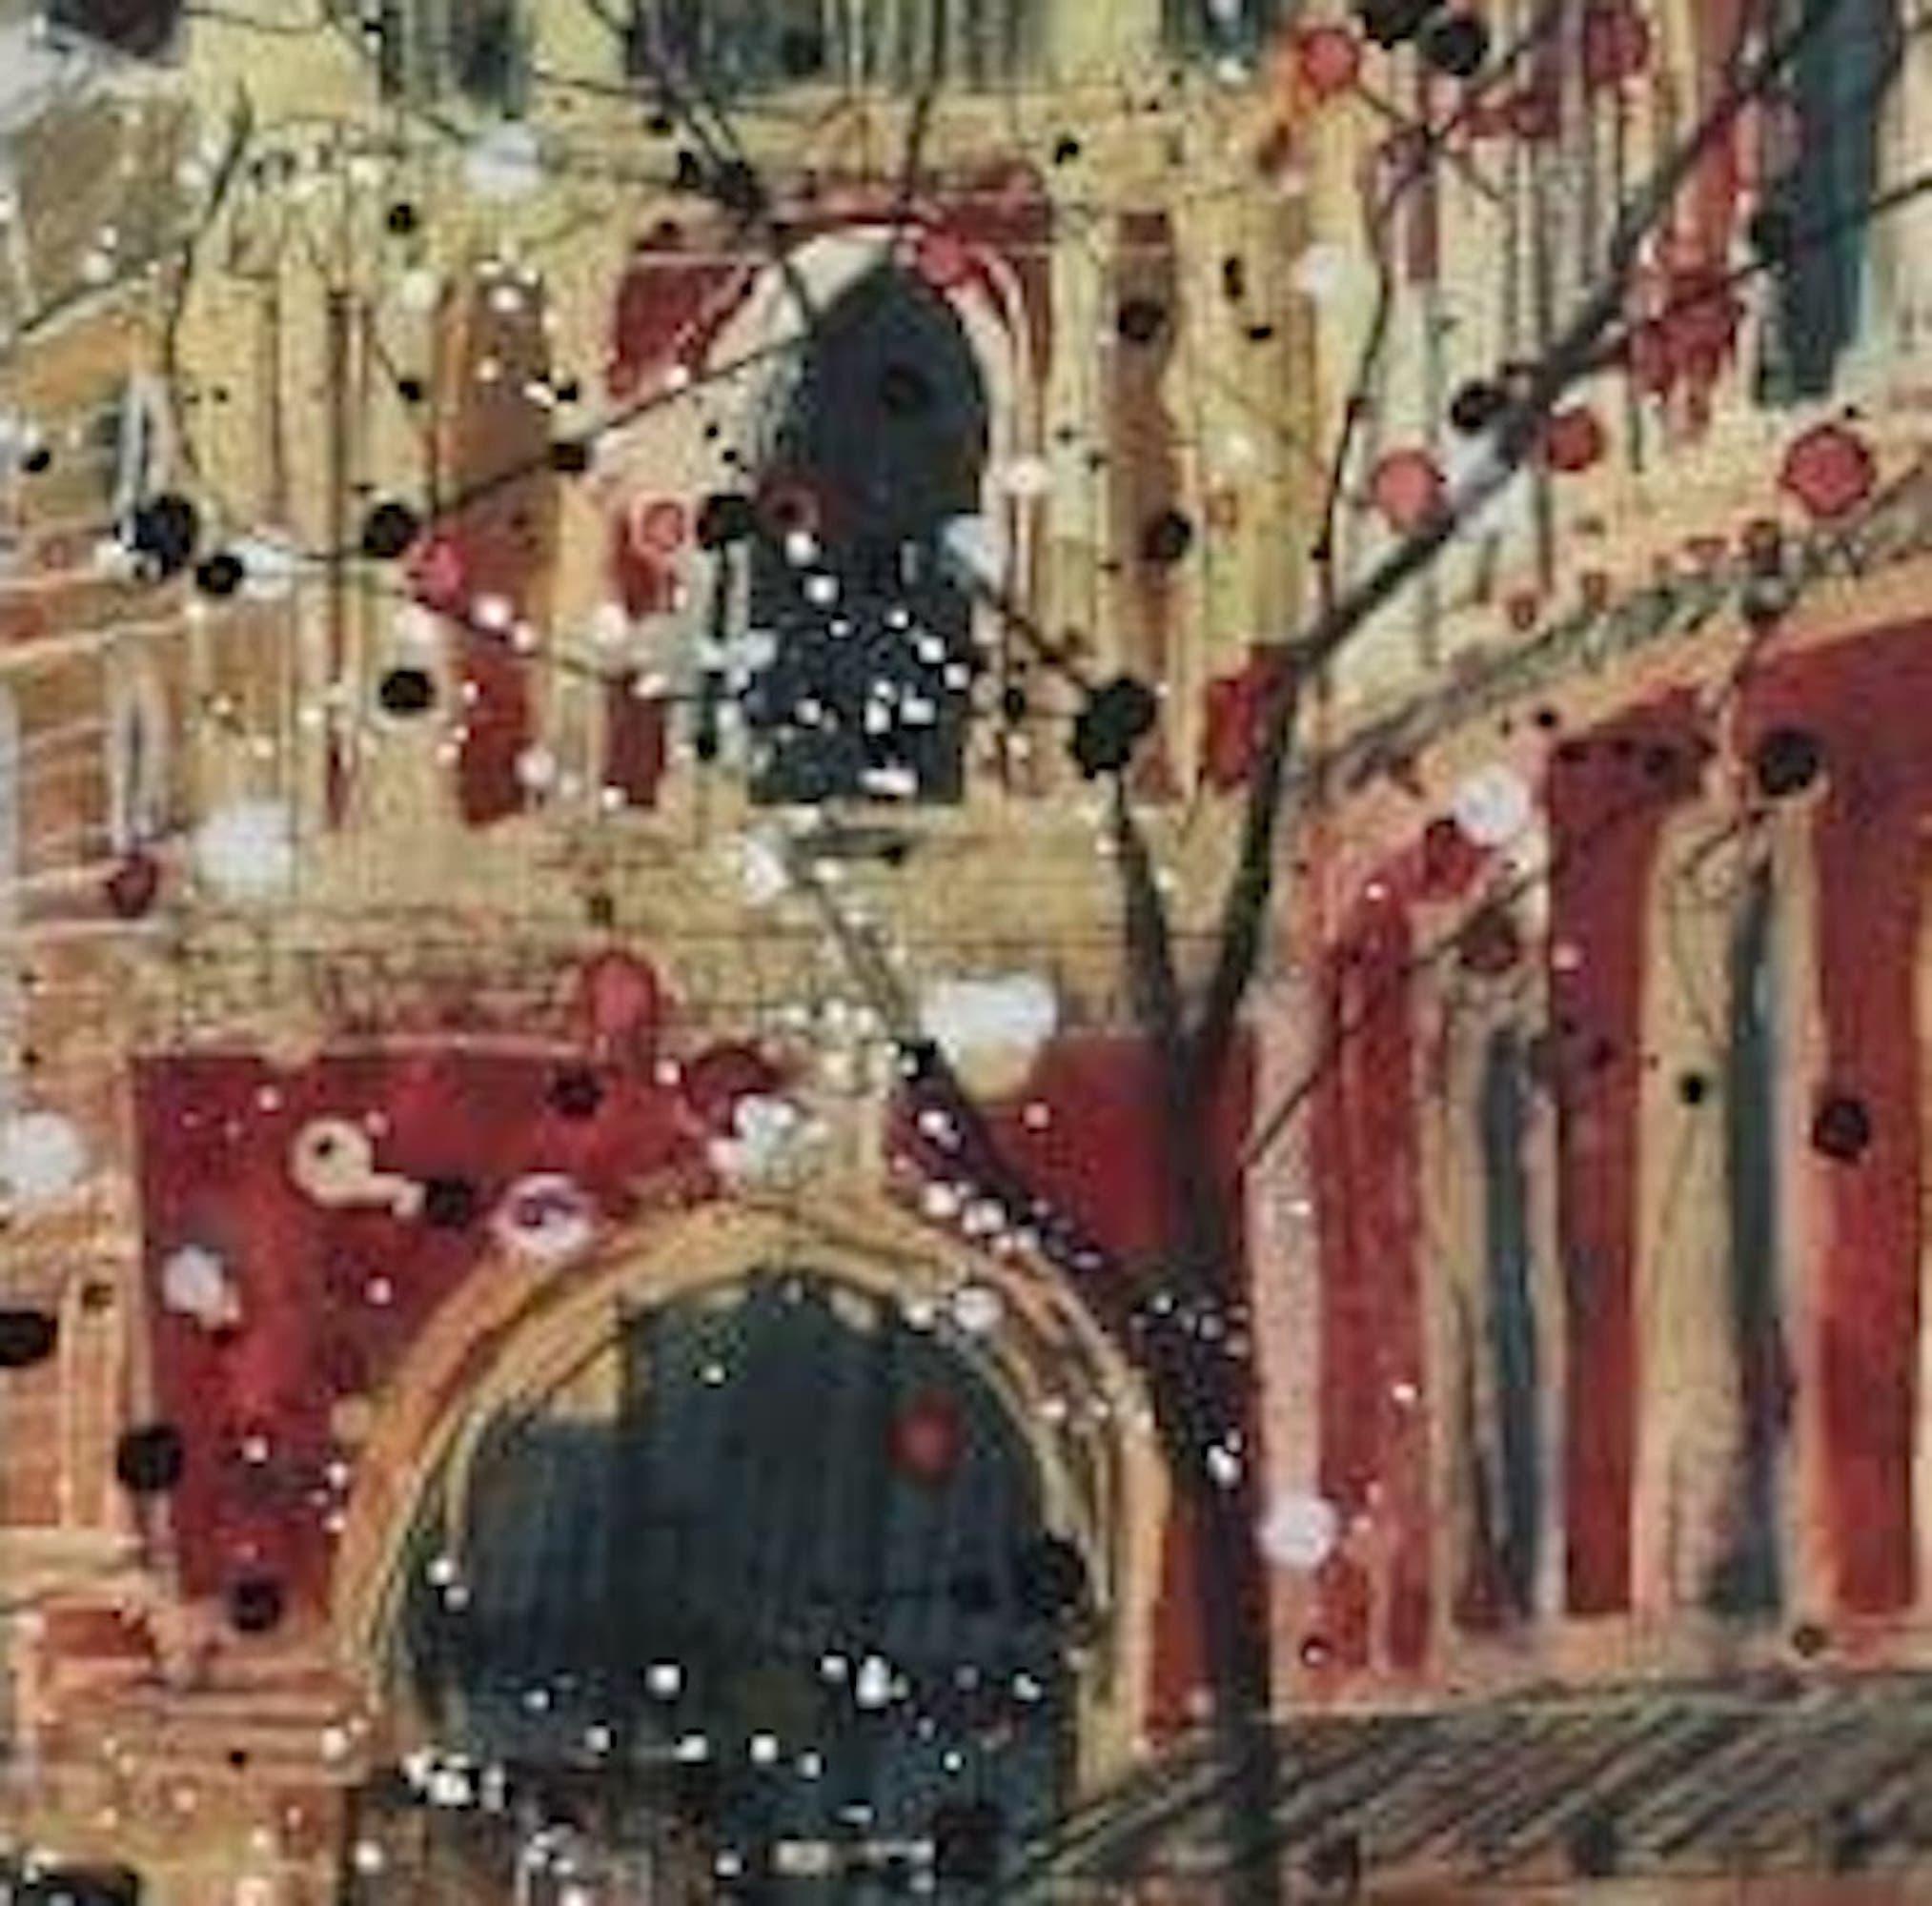 Classical Venue, Royal Albert Hall, London Art, Architecture Art, Cityscape Art - Contemporary Painting by Susan Brown